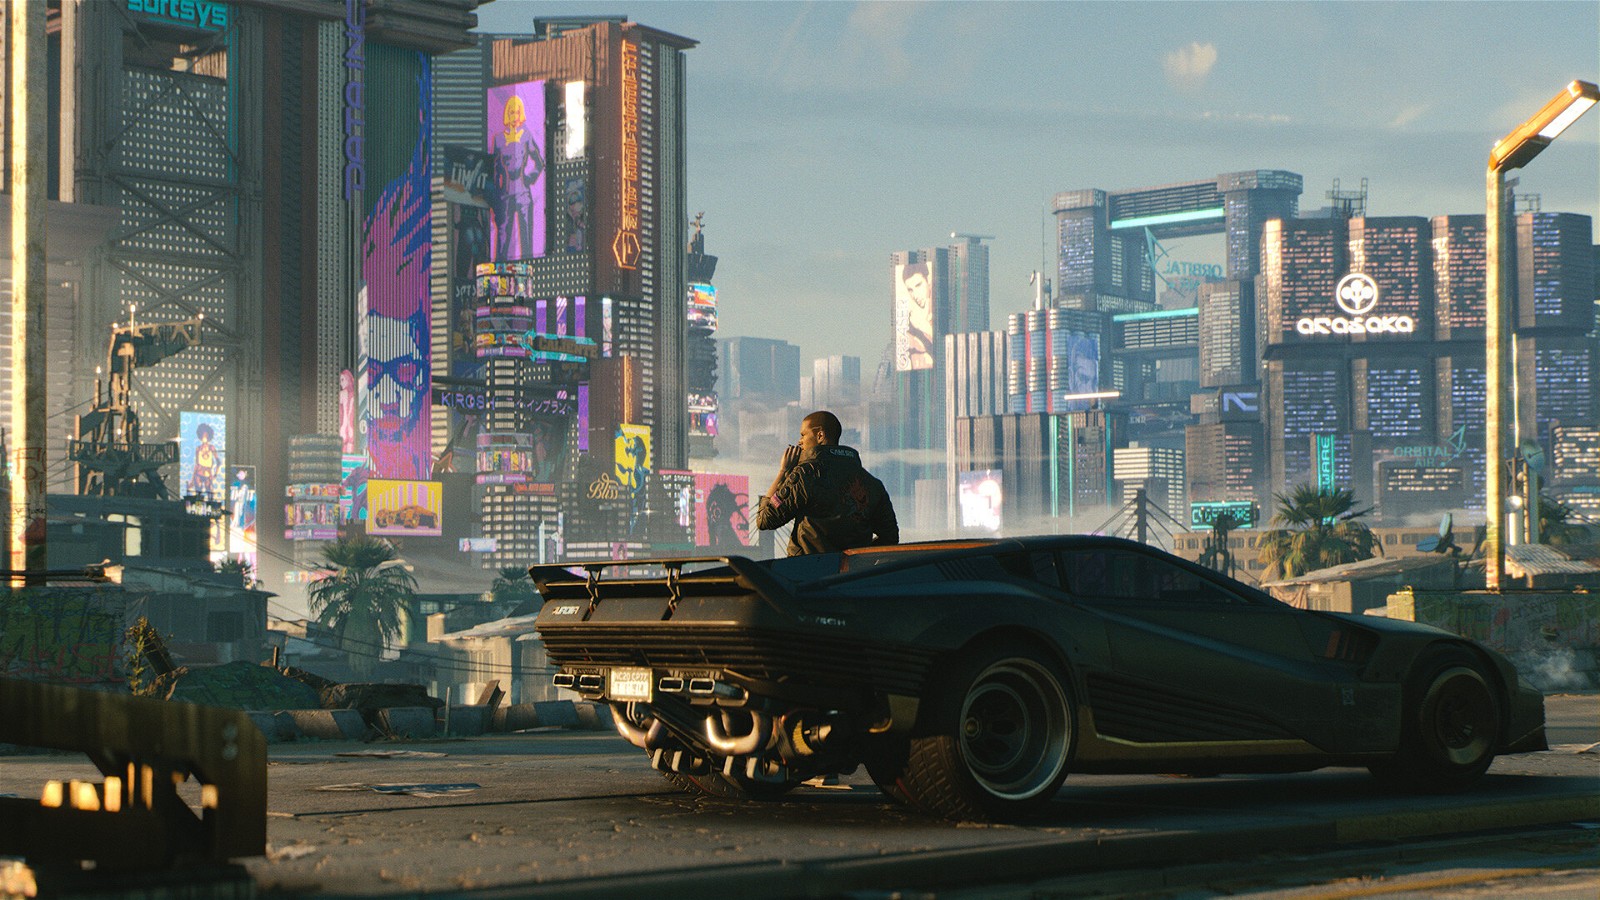 Cyberpunk 2077 launched with a huge fanbase